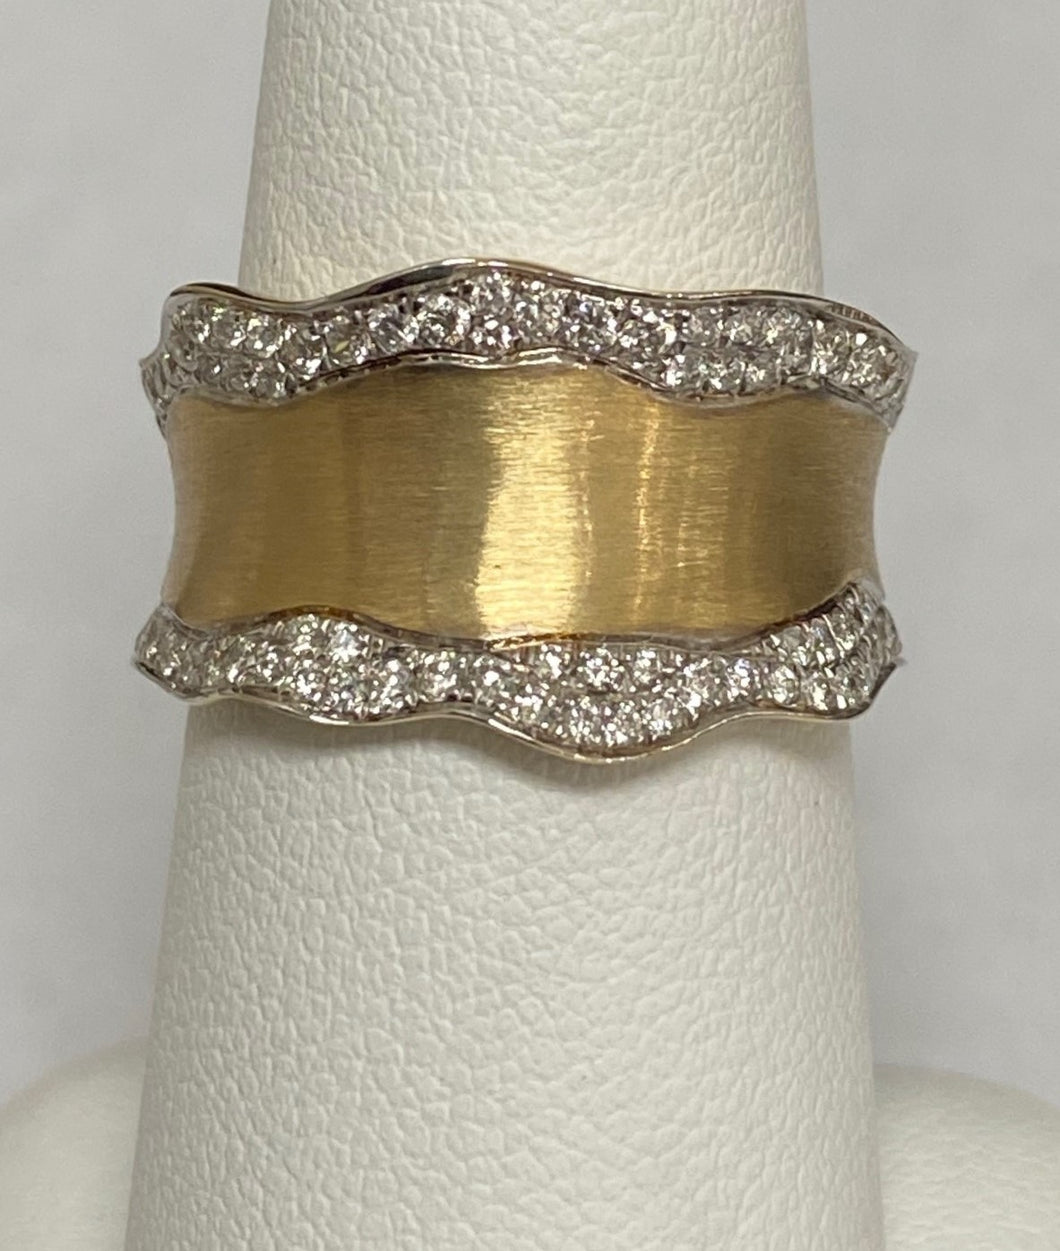 14kt Yellow and White Gold Diamond Ring With Satin Finish